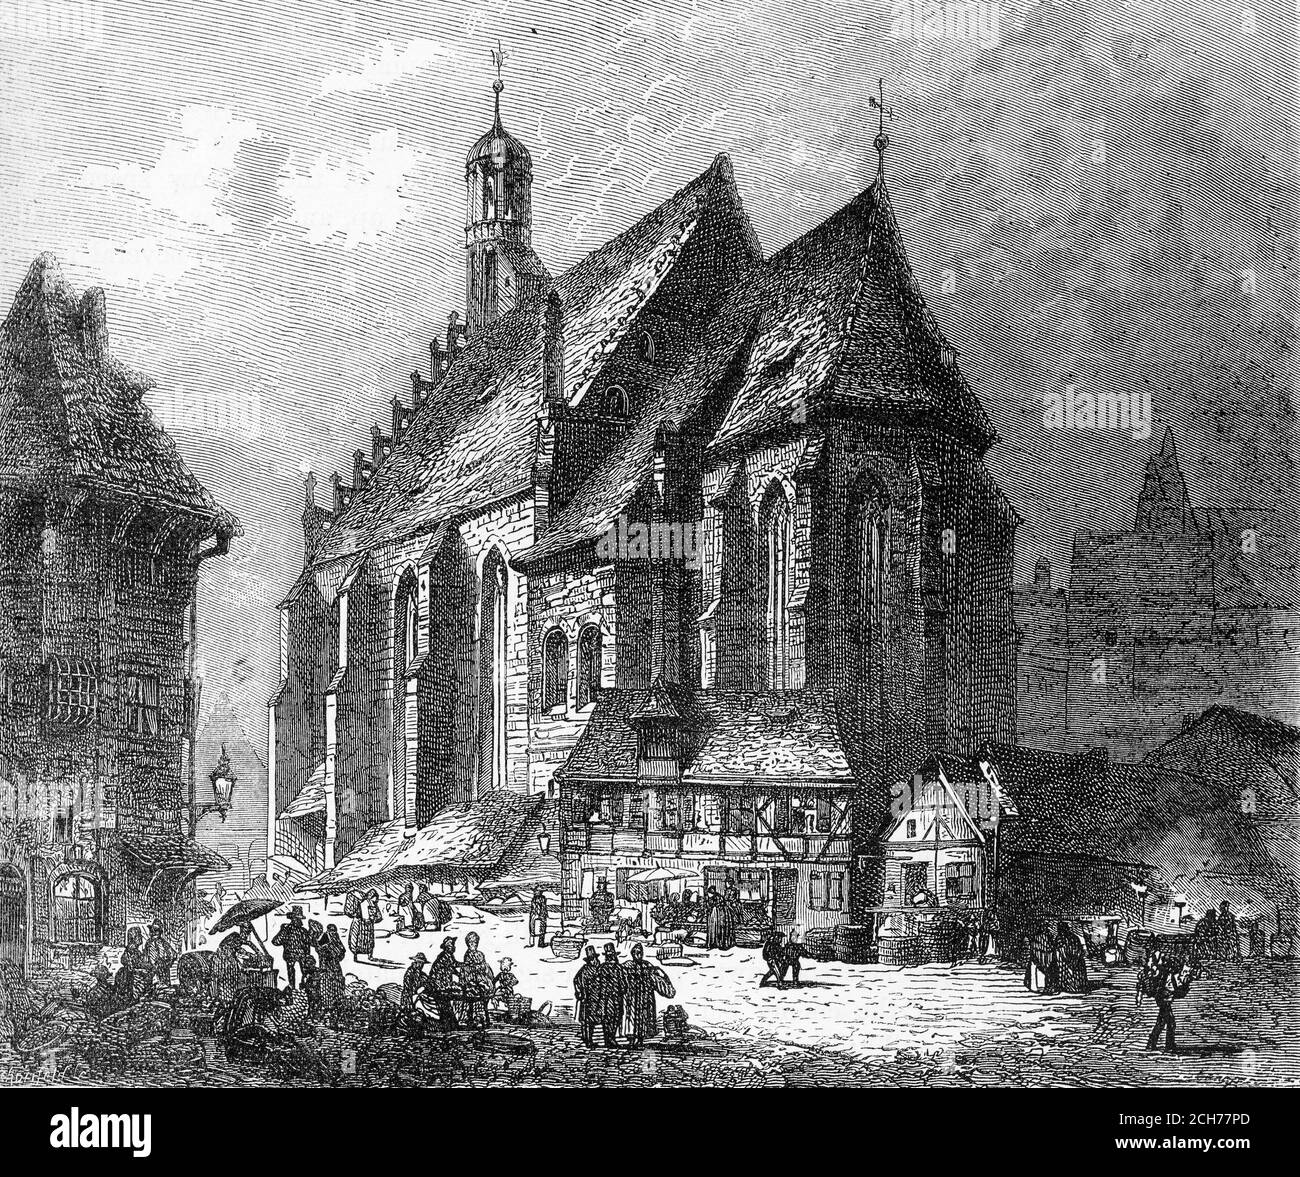 Engraving of the market in Nuremberg circa 1550, illustration from 'The history of Protestantism' by James Aitken Wylie (1808-1890), pub. 1878 Stock Photo